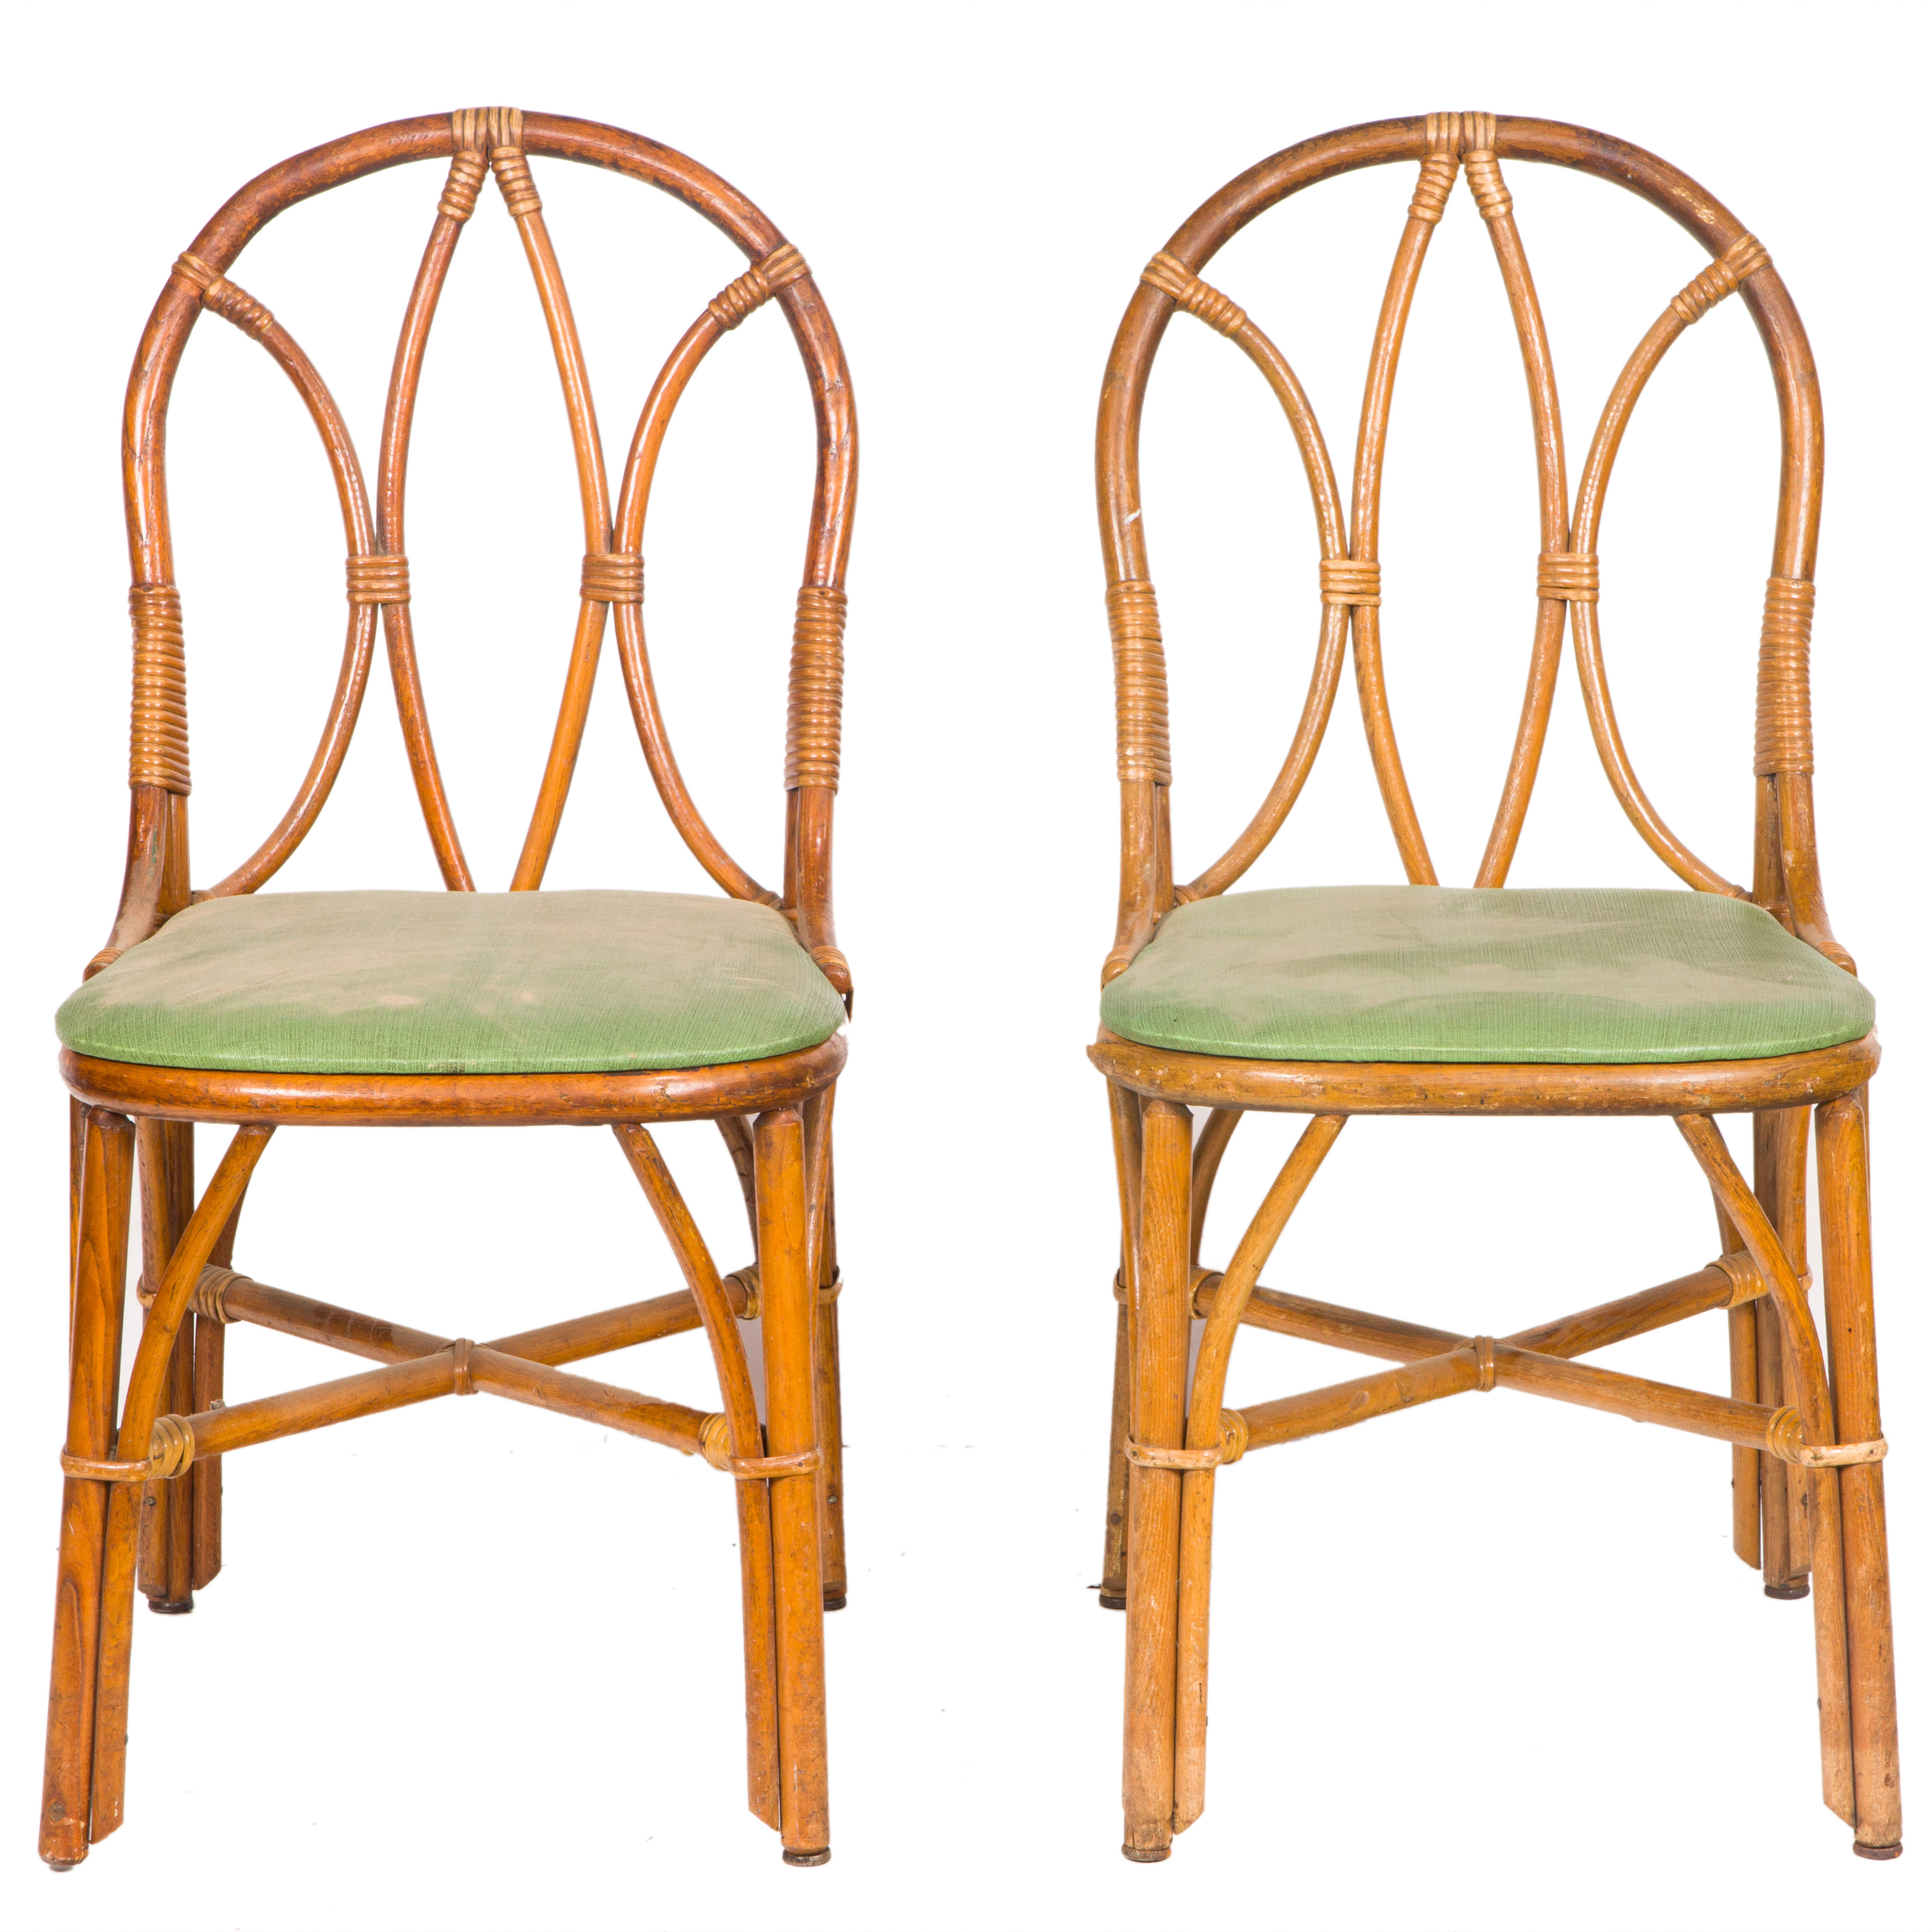 A PAIR OF MCGUIRE STYLE SIDE CHAIRS